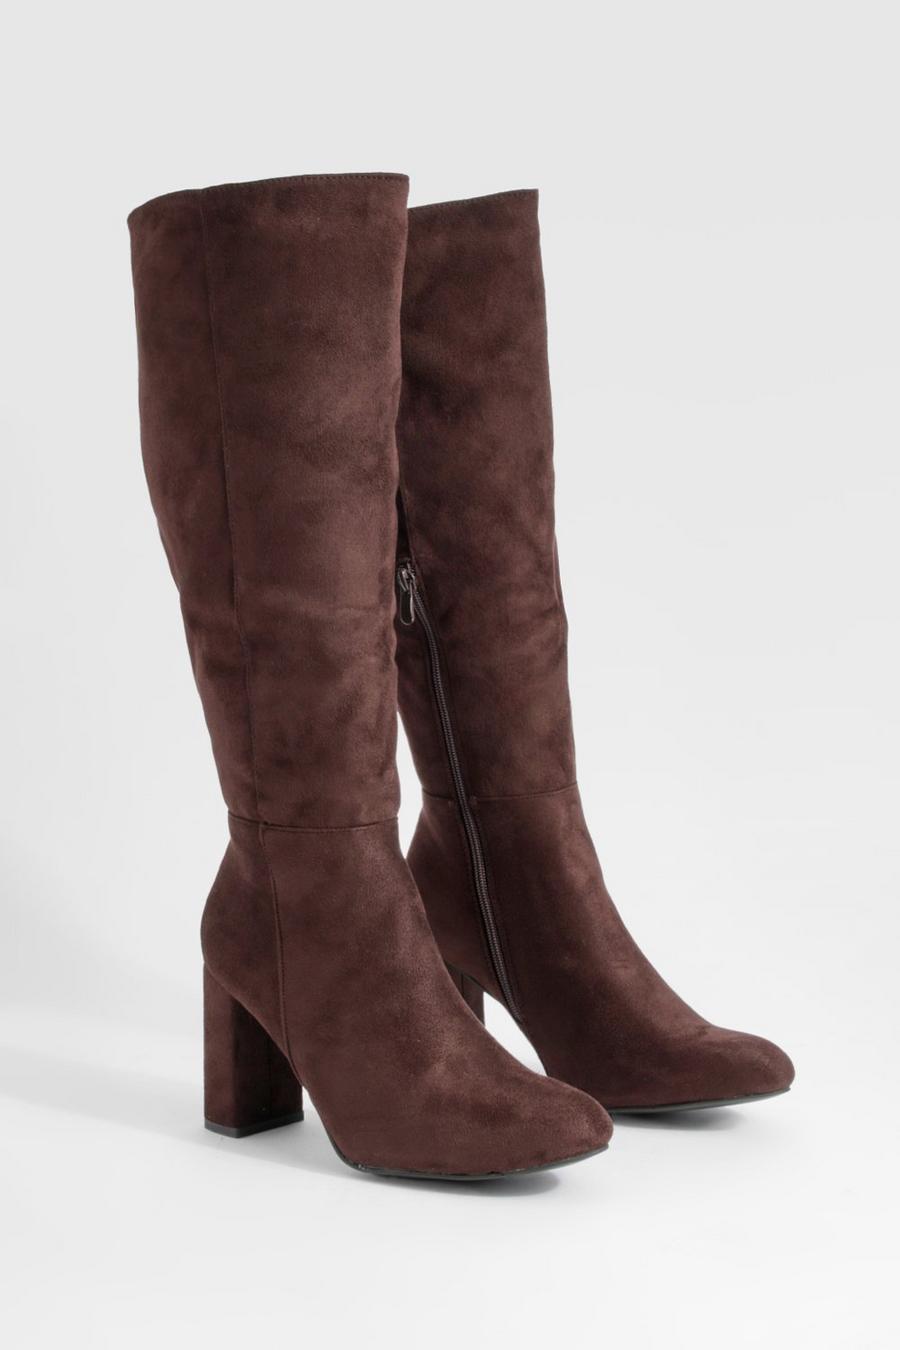 Chocolate Wide Fit Block Heel Knee High Pull On Boots